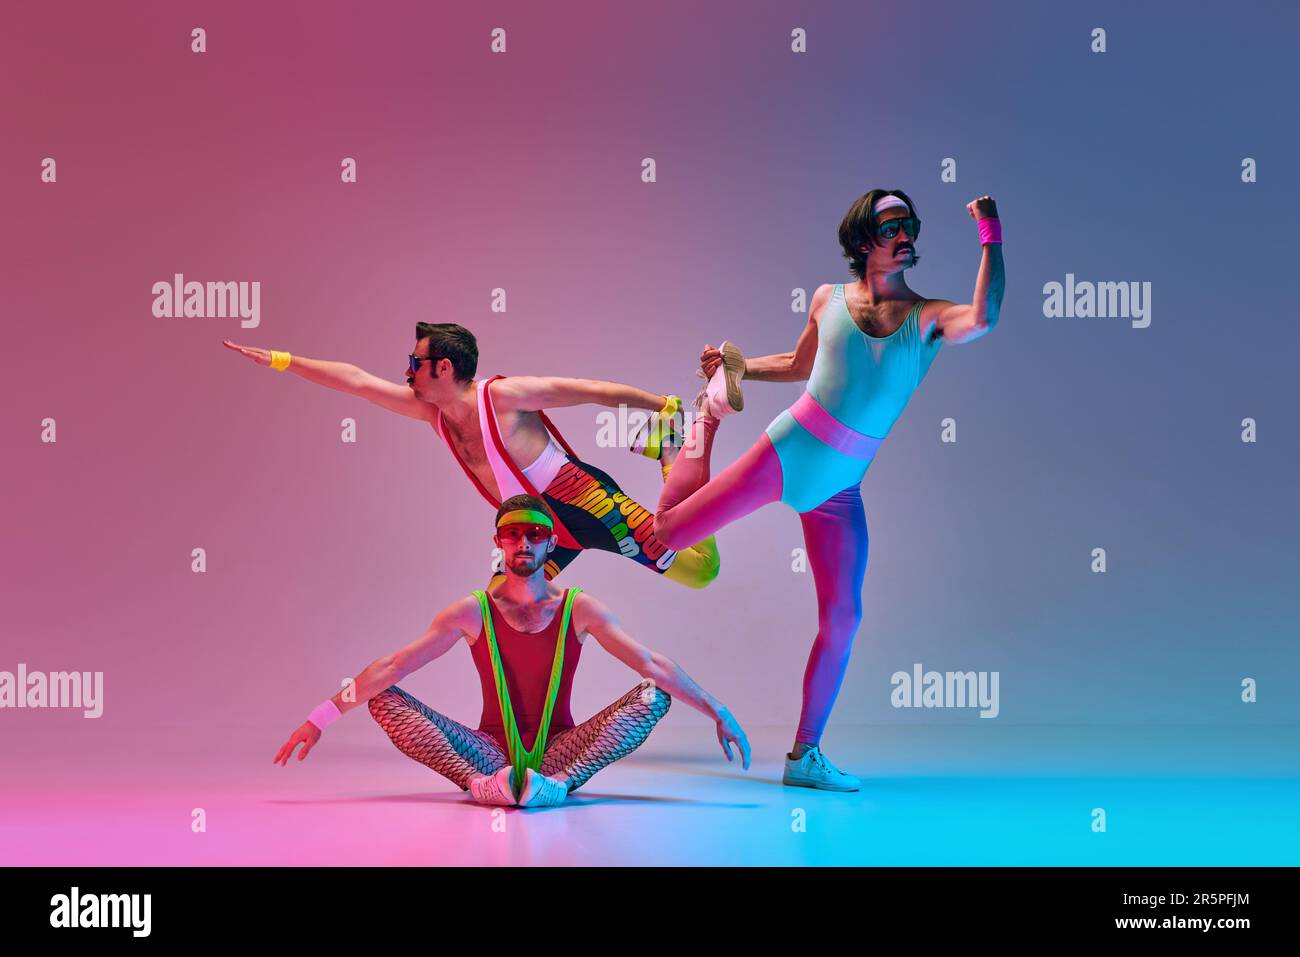 Flexible, stylish men in vintage sportswear training, stretching against  gradient blue pink studio background in neon light Stock Photo - Alamy